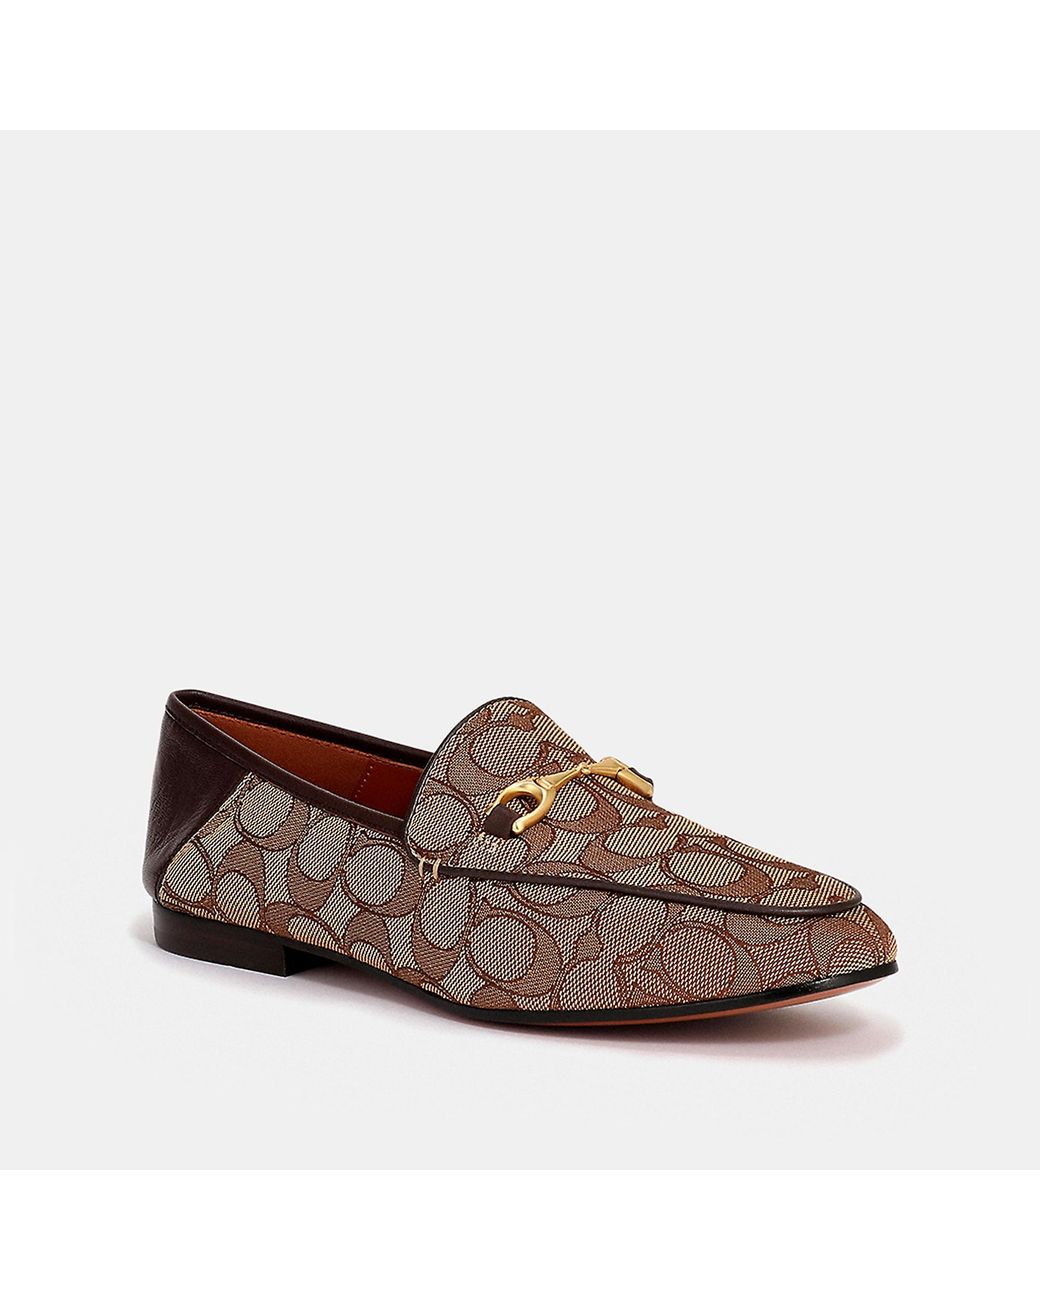 COACH Leather Haley Loafer in Khaki/Mahogany (Brown) - Lyst